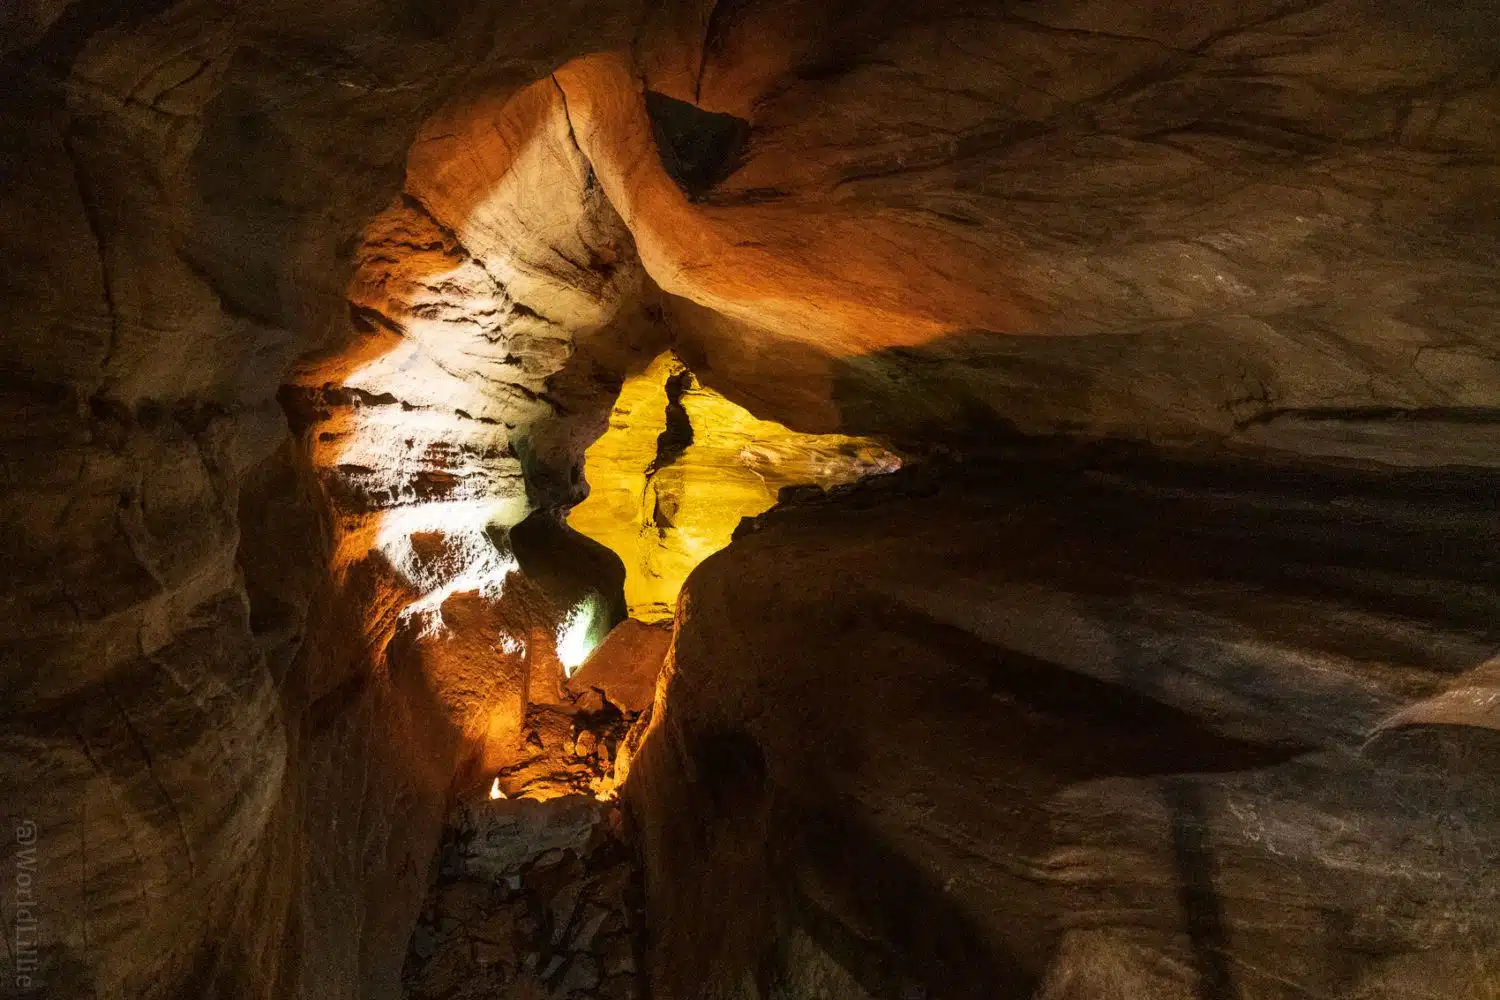 I love the light in this cave photo.